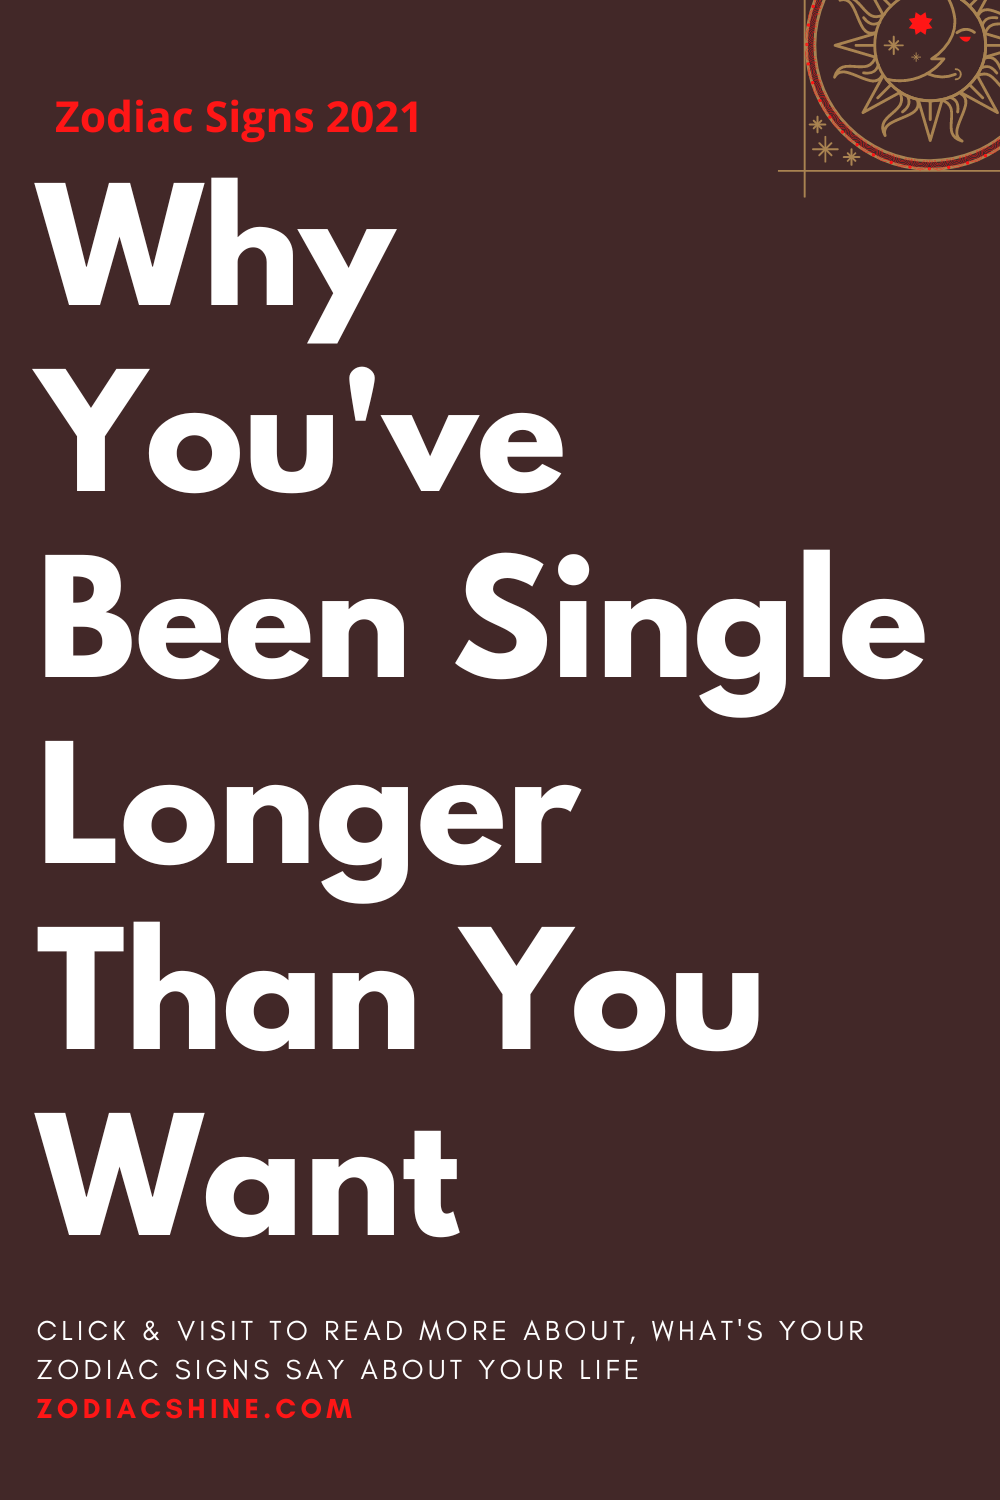 Why You've Been Single Longer Than You Want